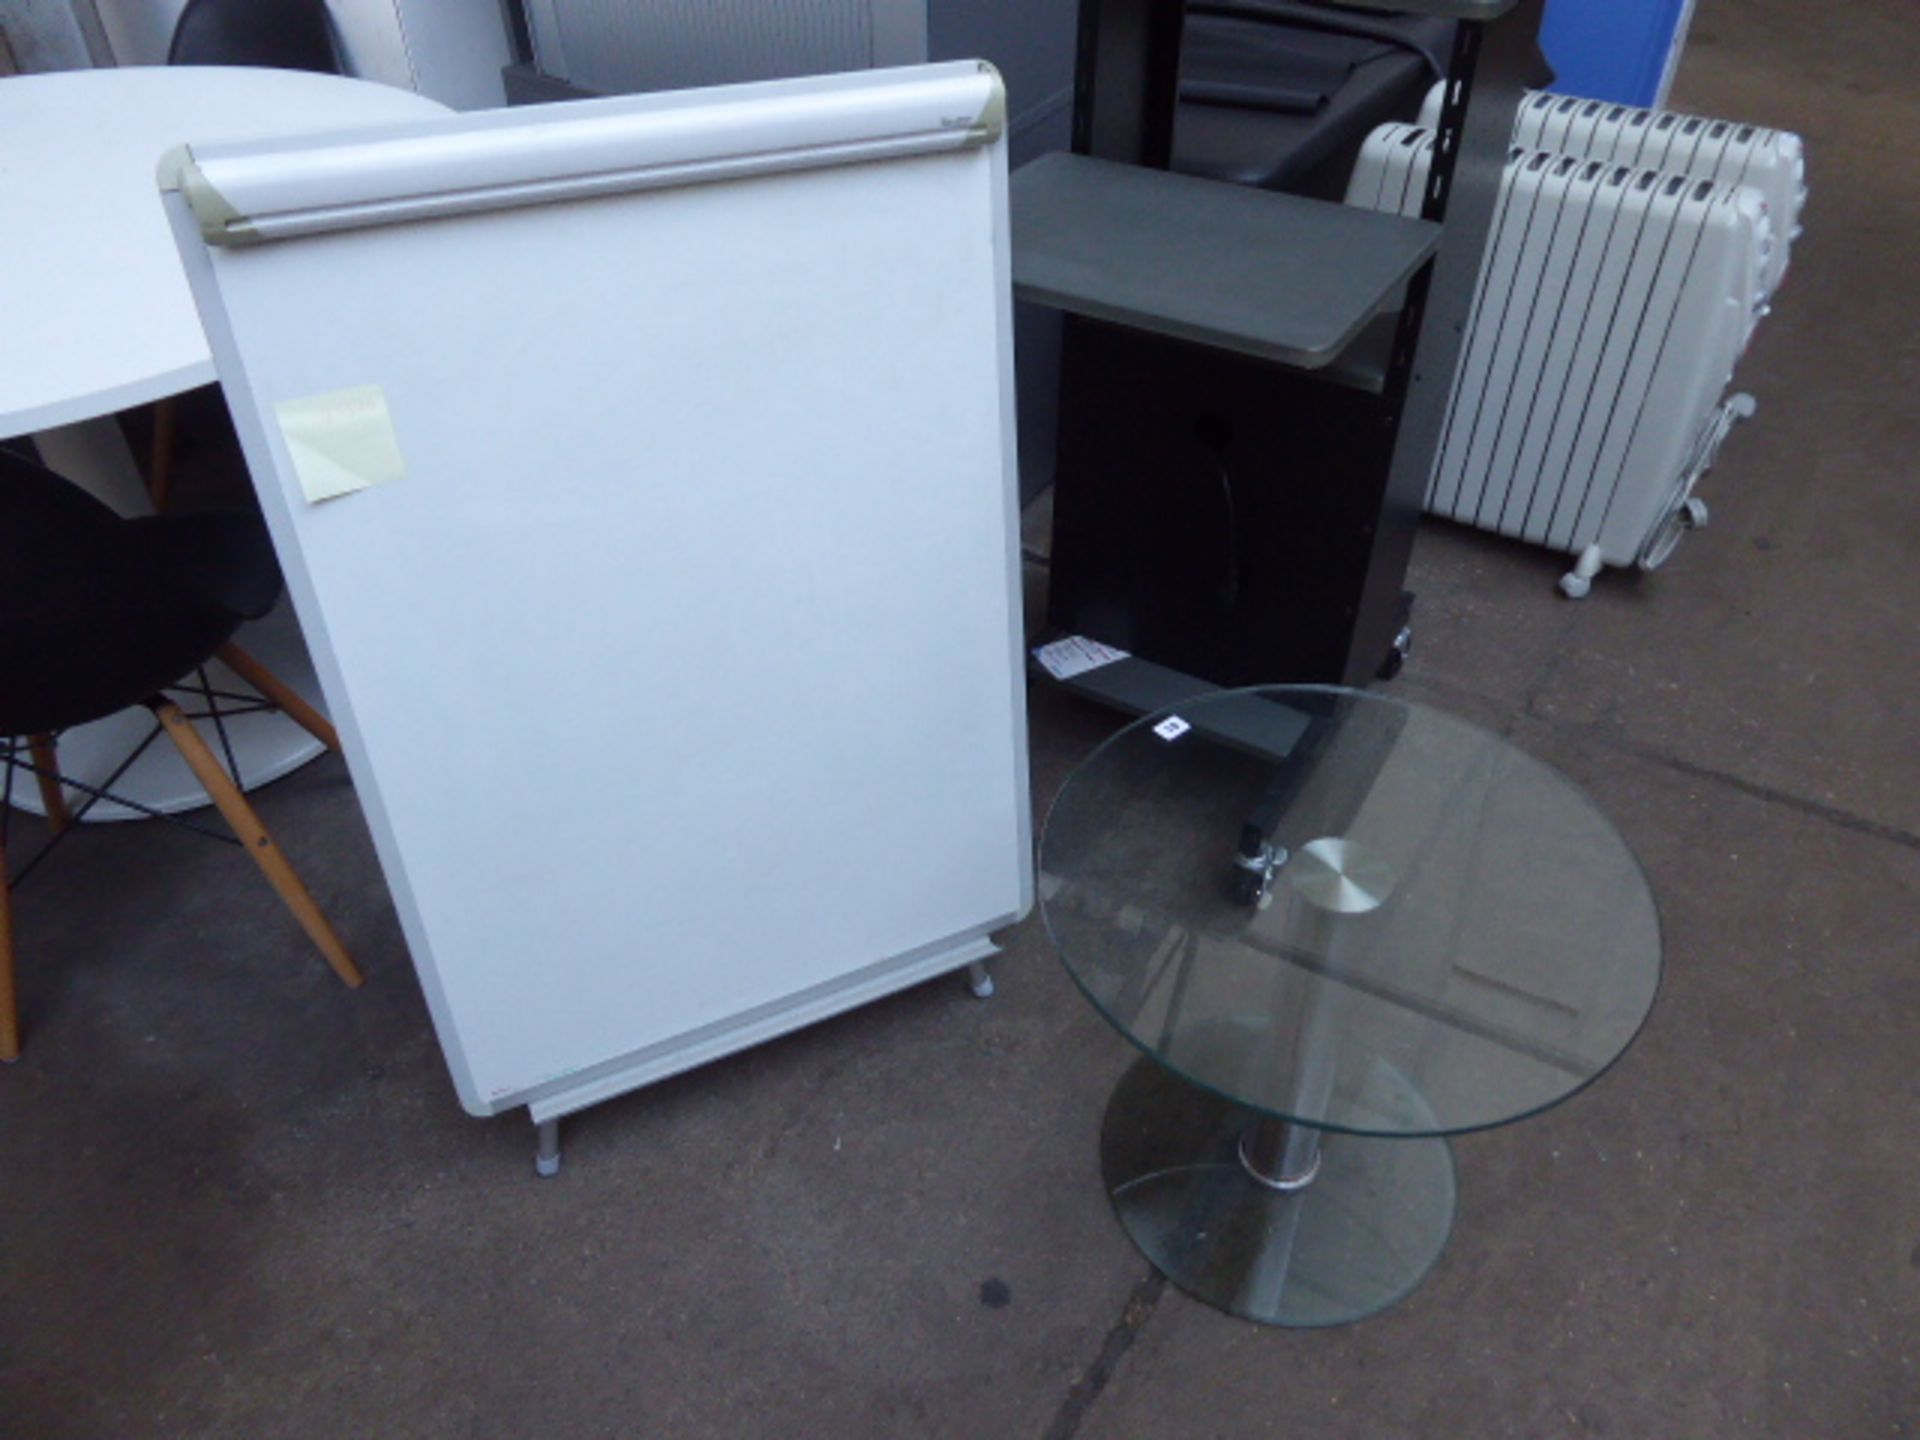 Small glass circular table with a projector mobile mobile console and an A frame white board - Image 2 of 2